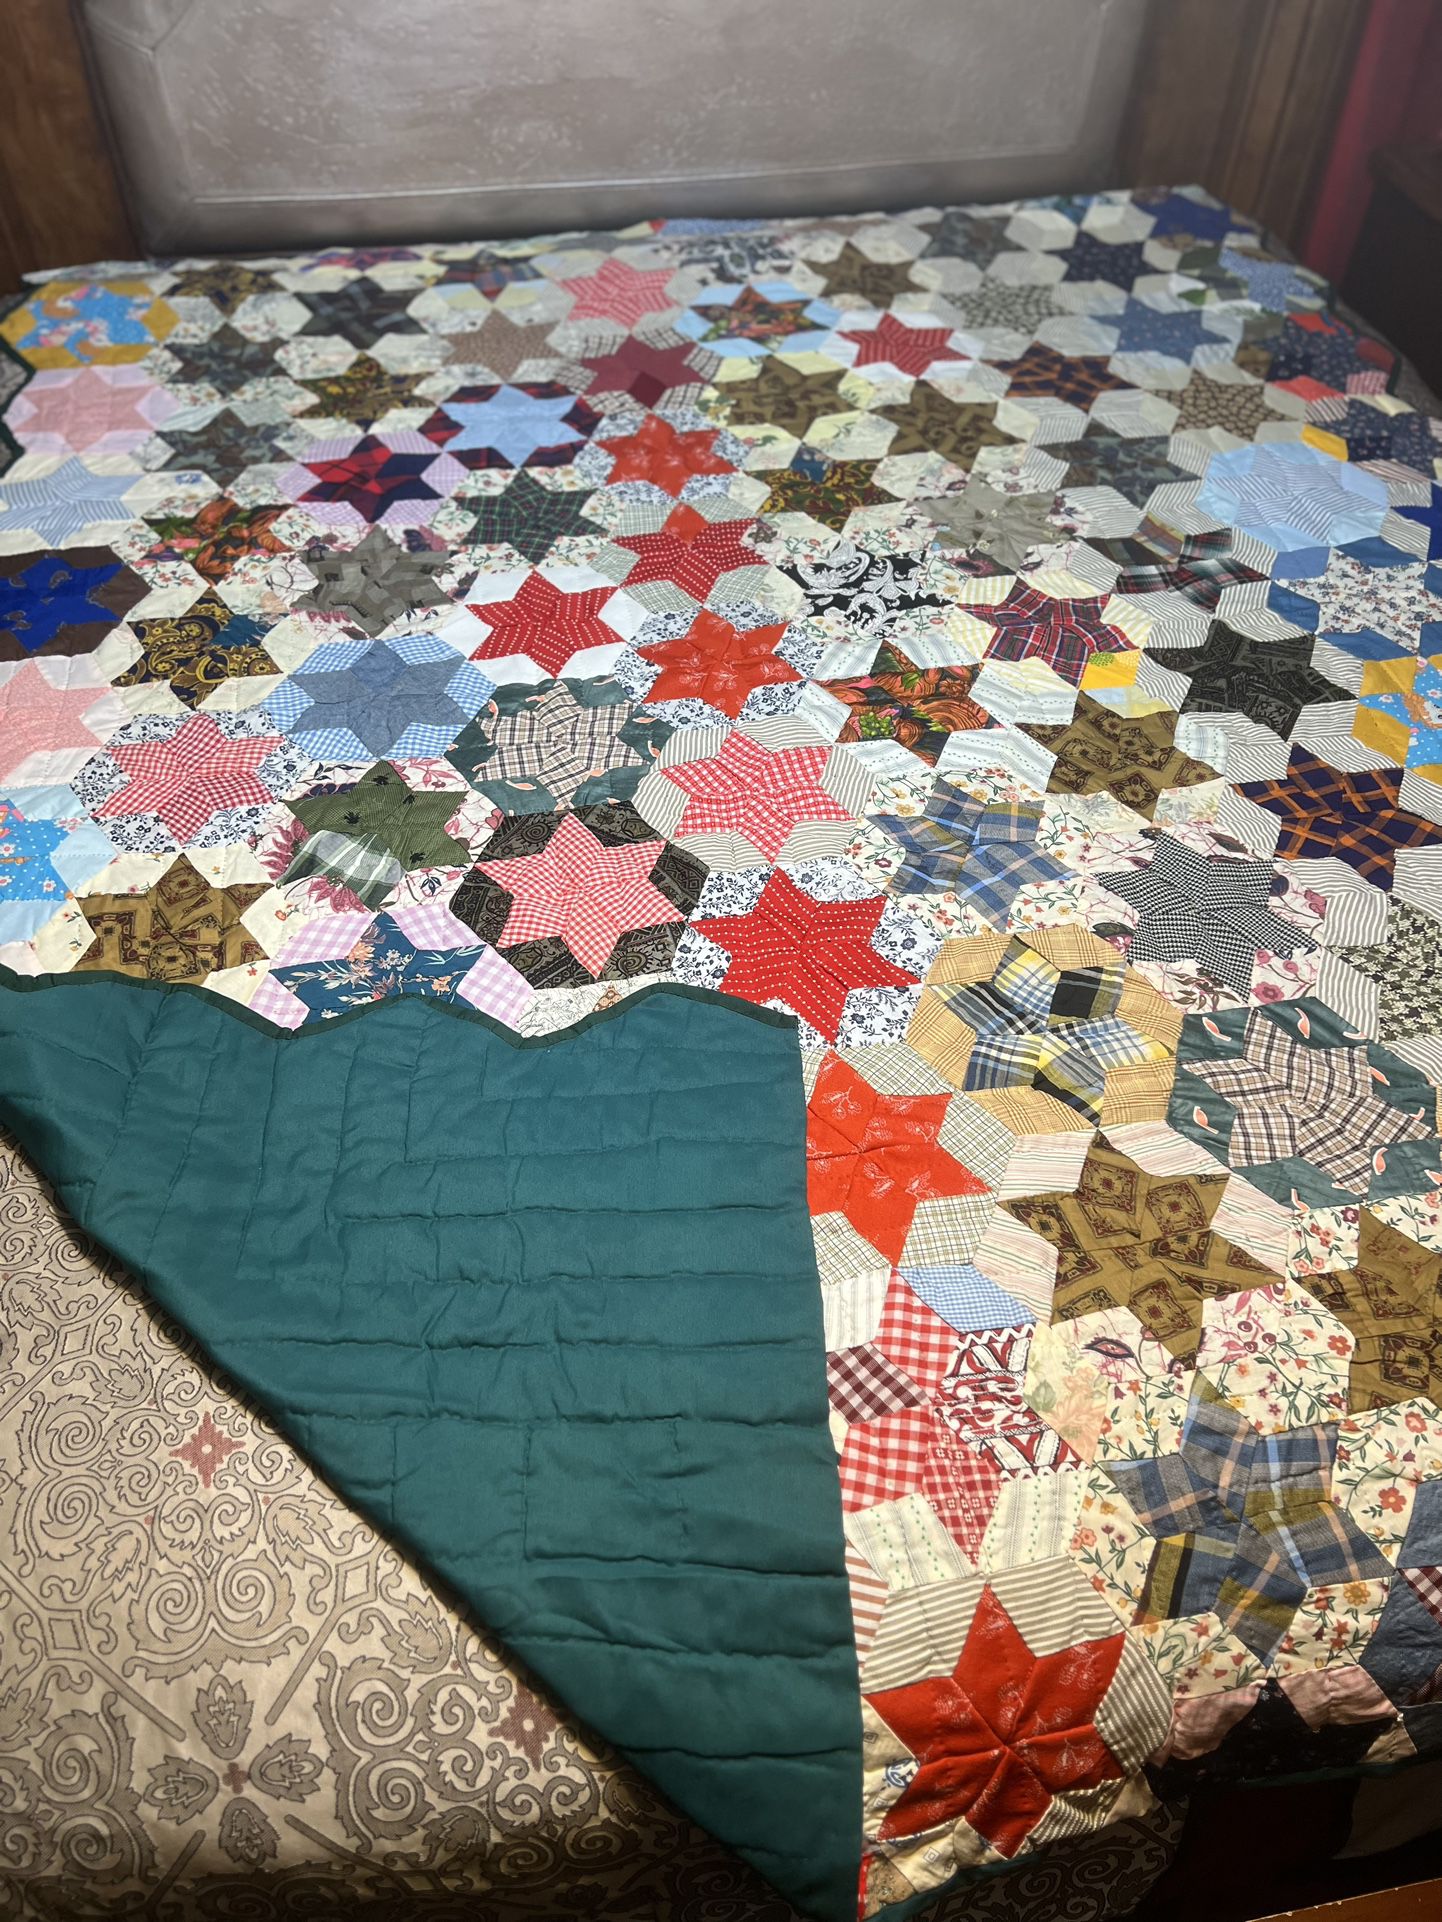 Full/Queen Size Handsewn Quilt. 70 X 88 Inches. Very Good Condition. 